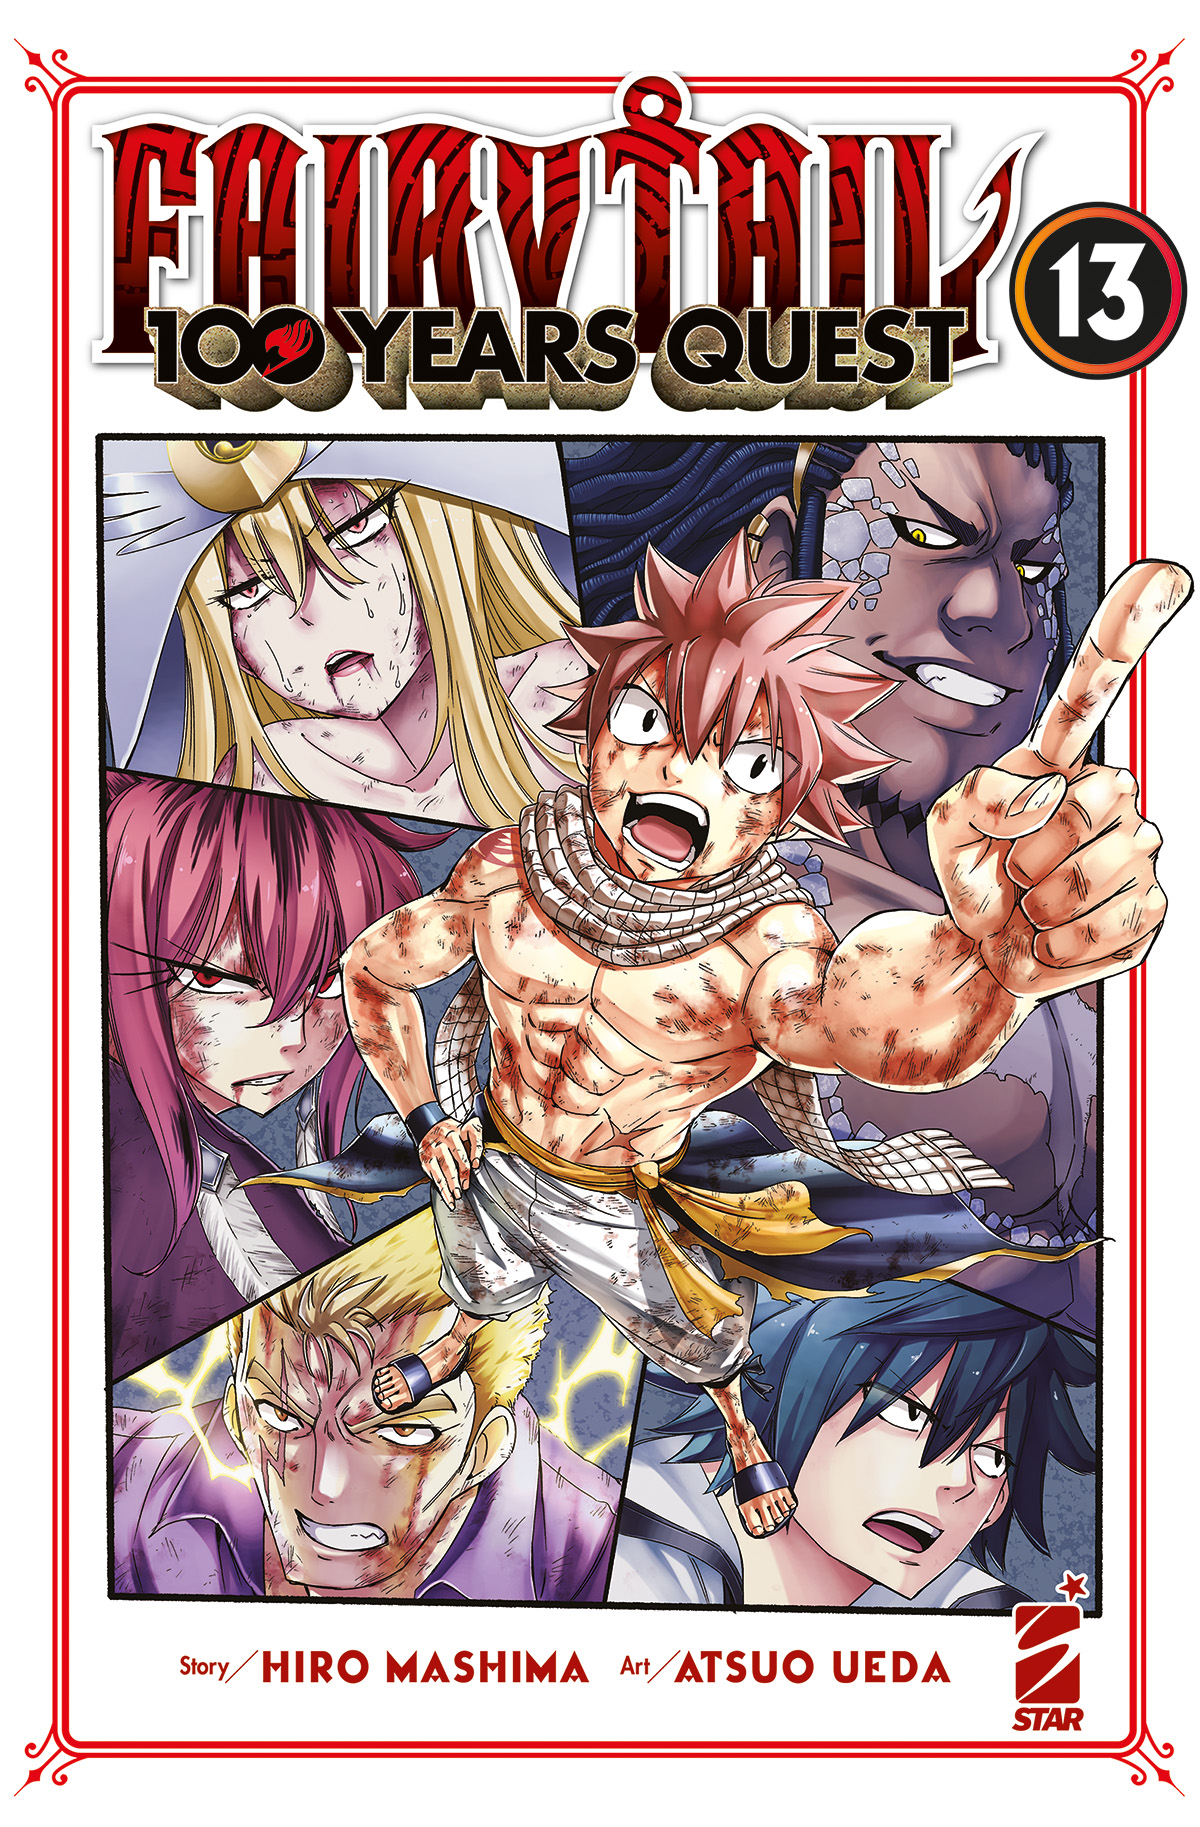 YOUNG #345 FAIRY TAIL 100 YEARS QUEST N.13